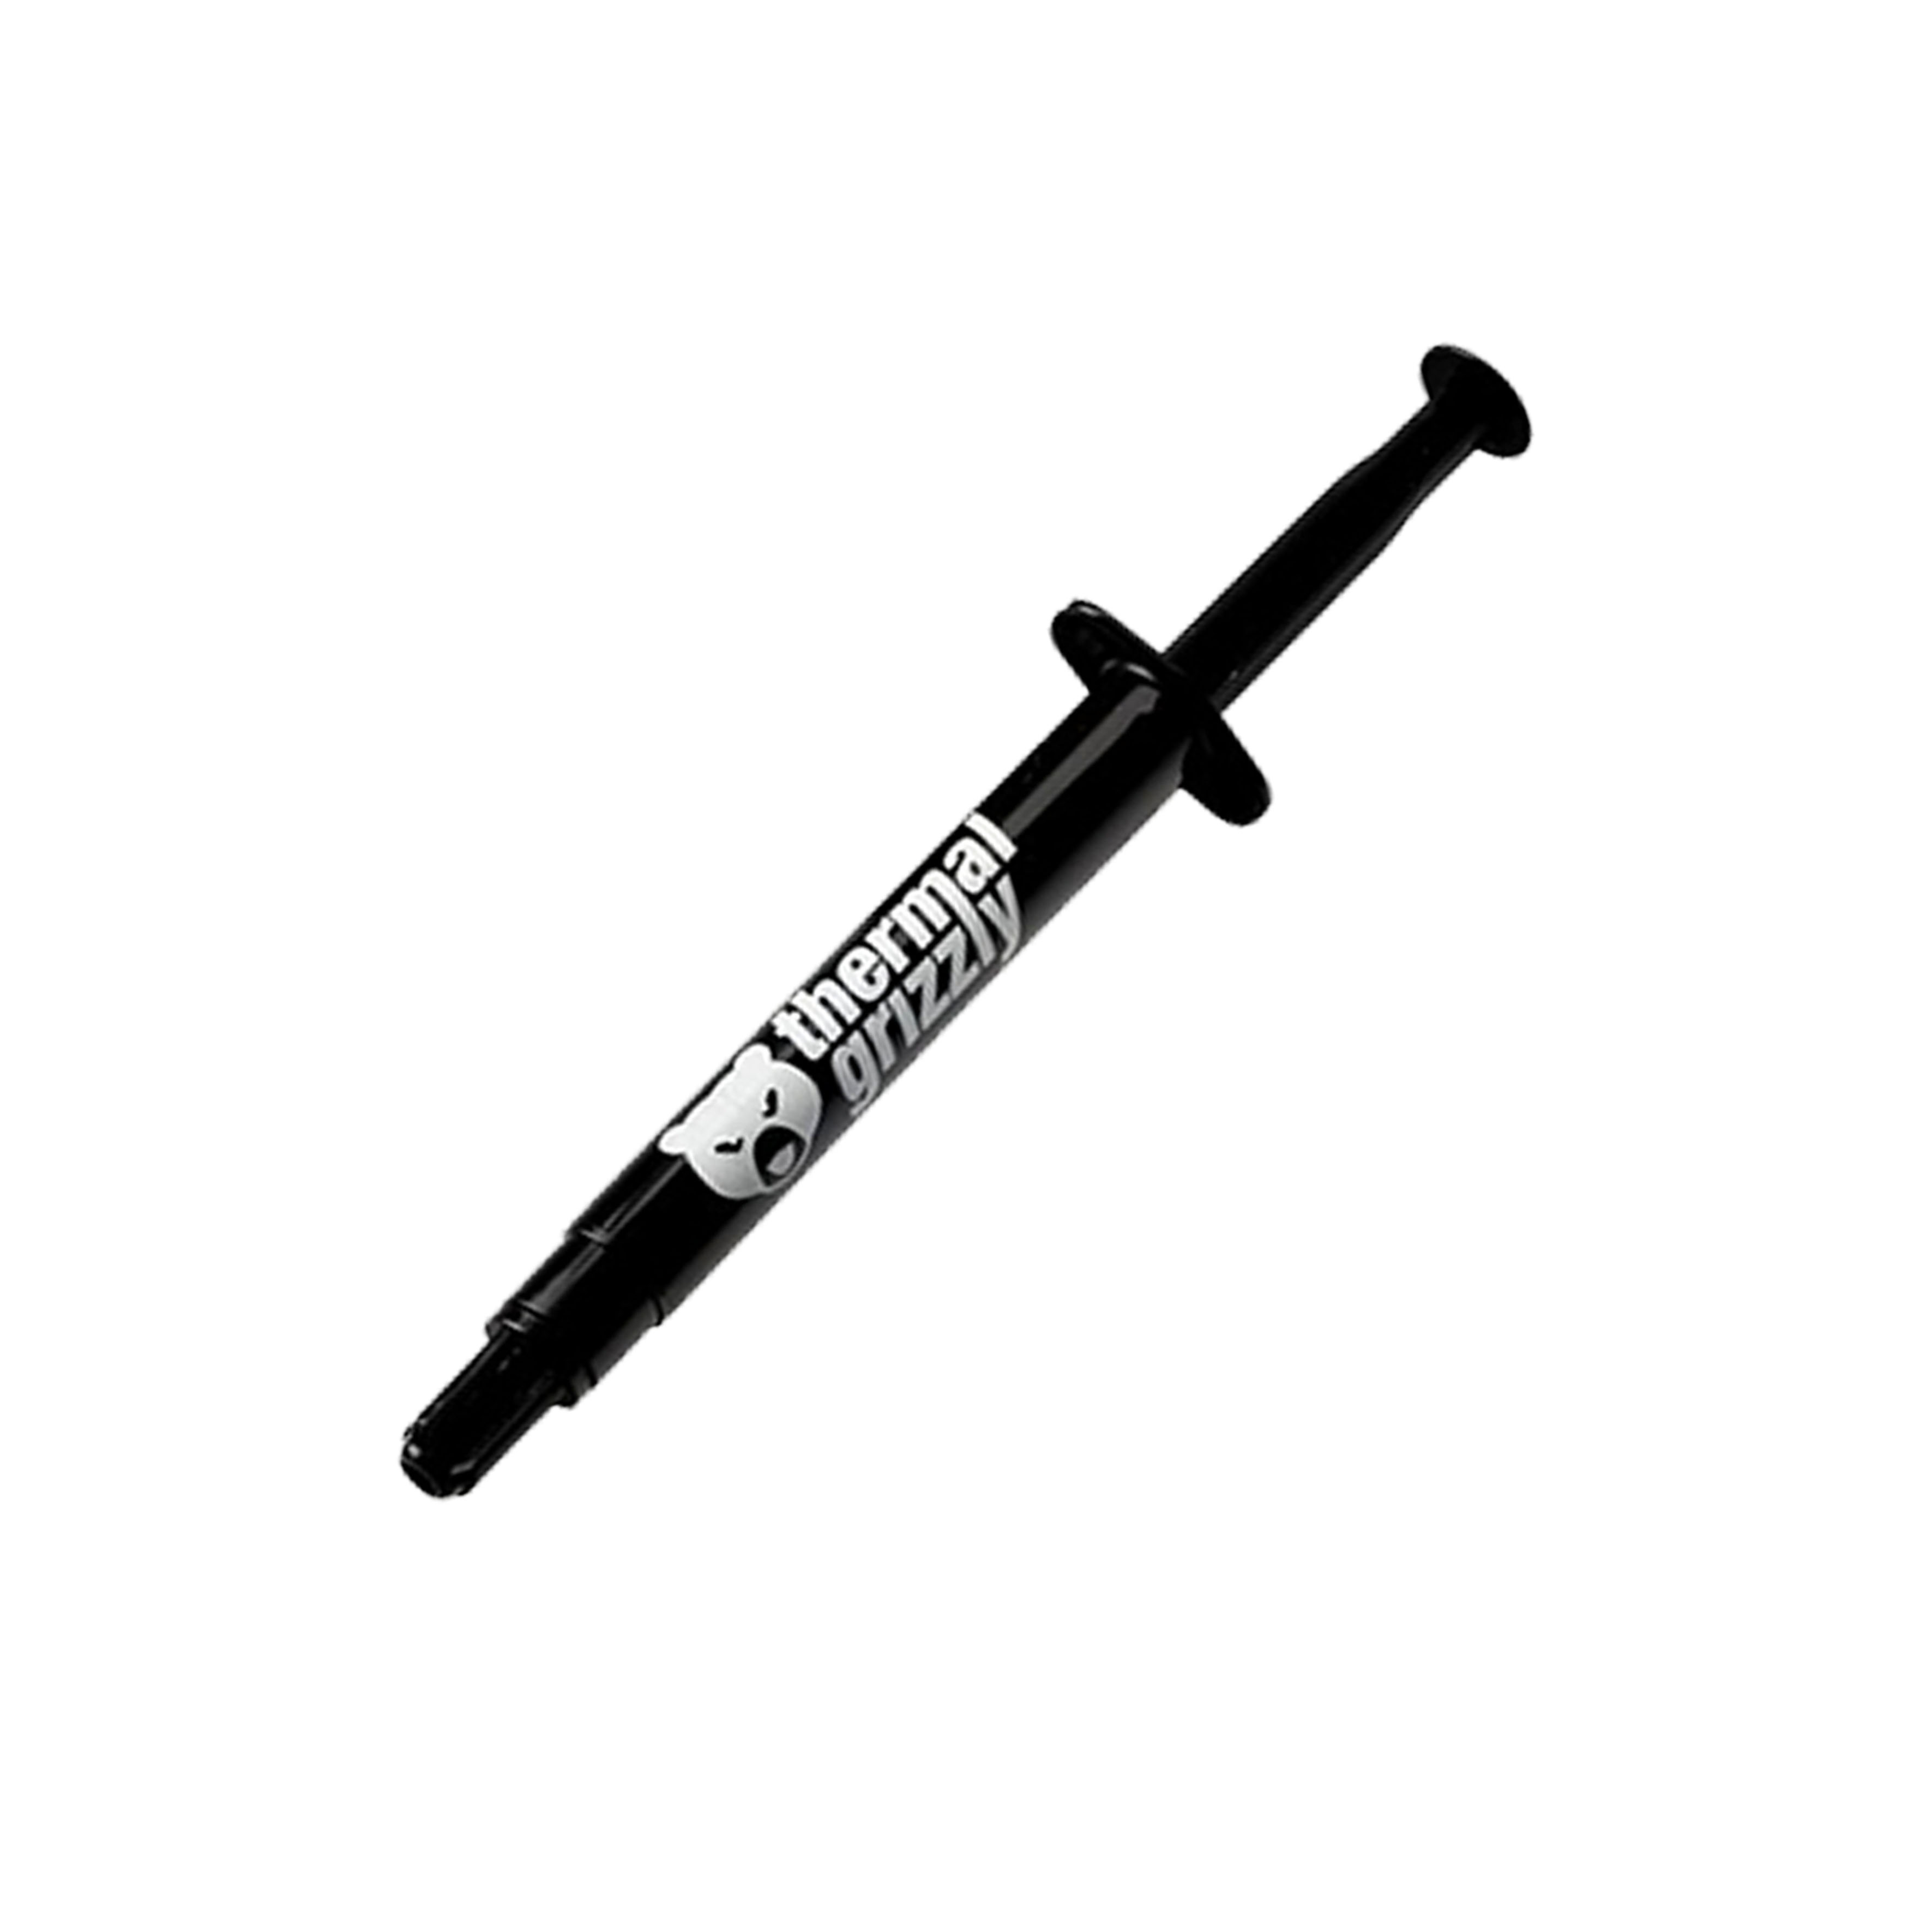 THERMAL GRIZZLY HYDRONAUT (1G) THERMAL PASTE - TG-H-001-RS